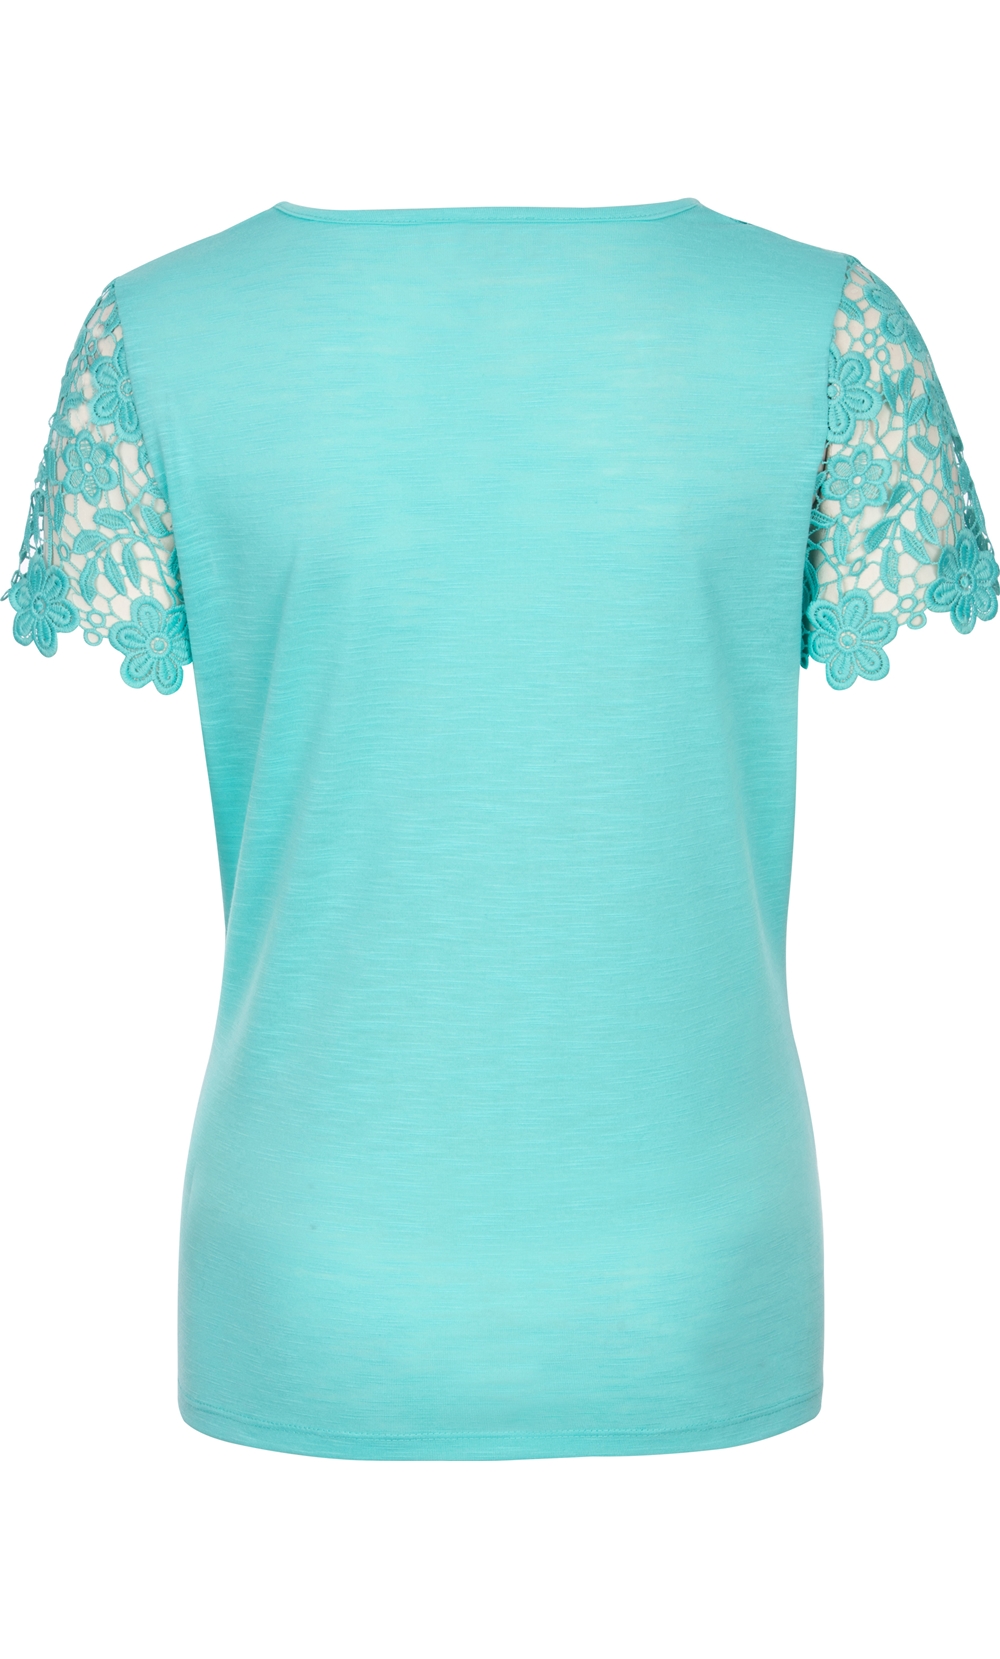 Anna Rose Short Sleeve Lace Trim Top